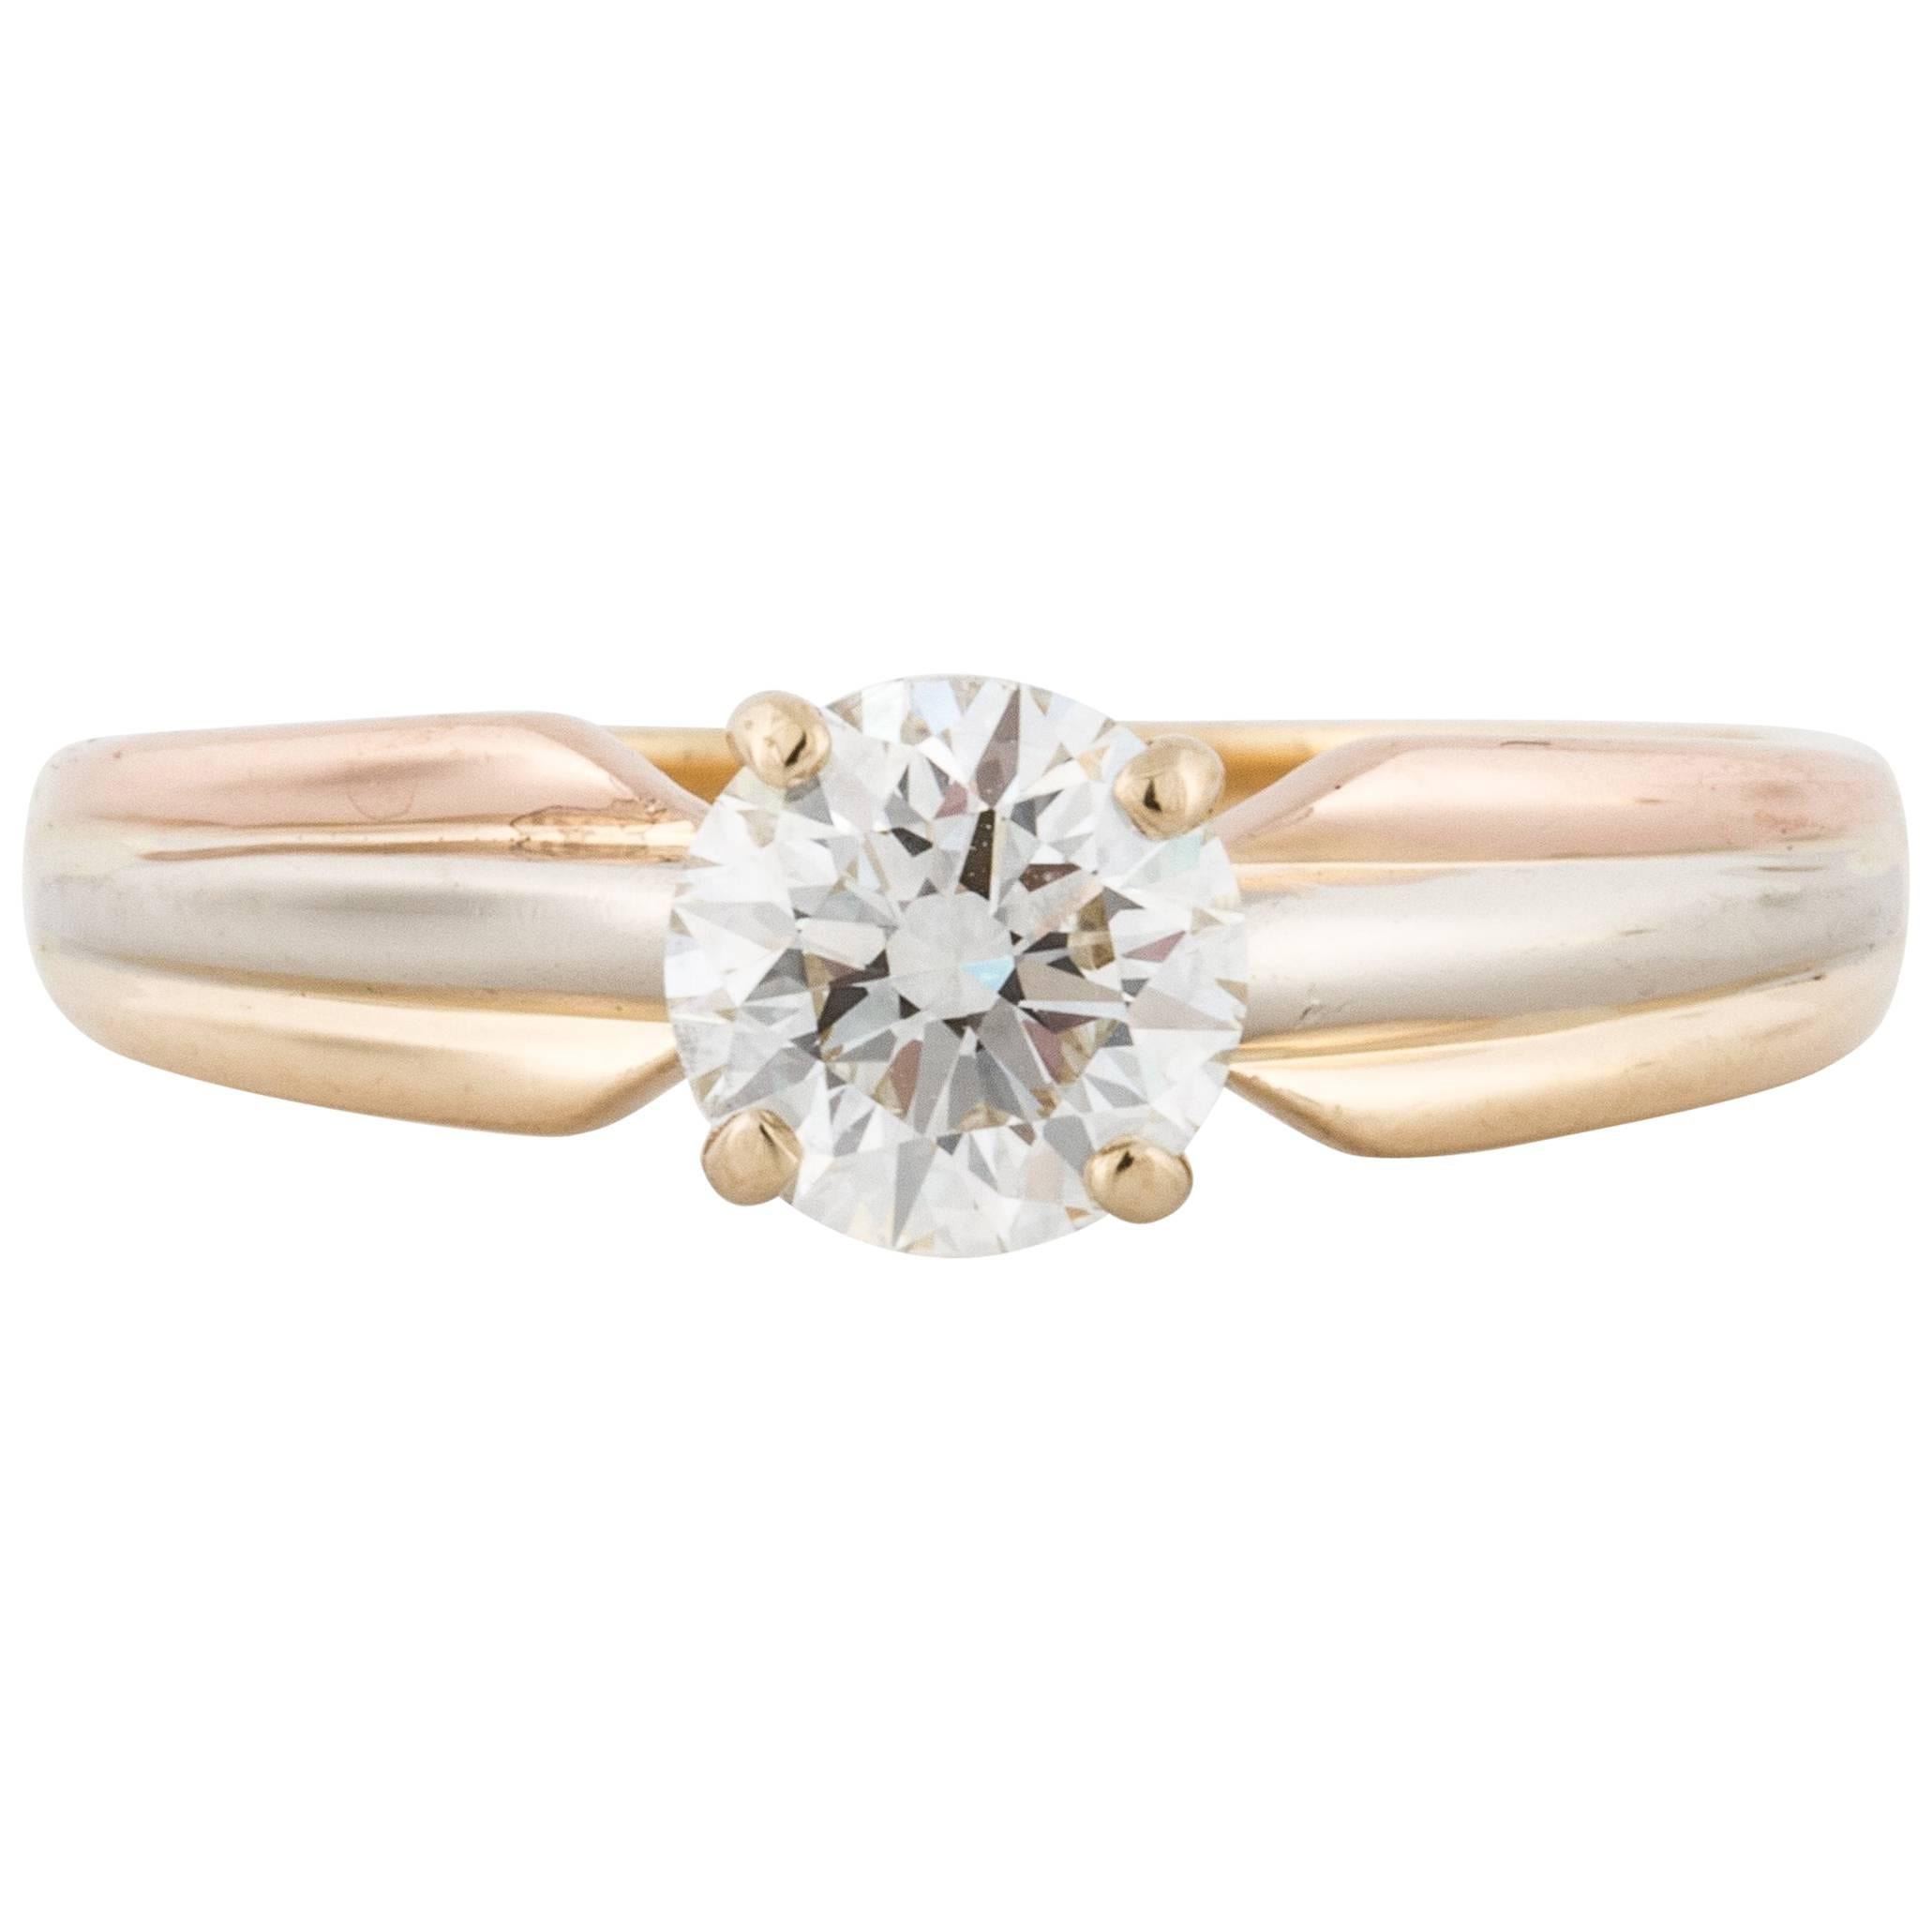 Cartier 0.95 carat GIA Round Diamond Solitaire Engagement Ring in Tri-Color Gold